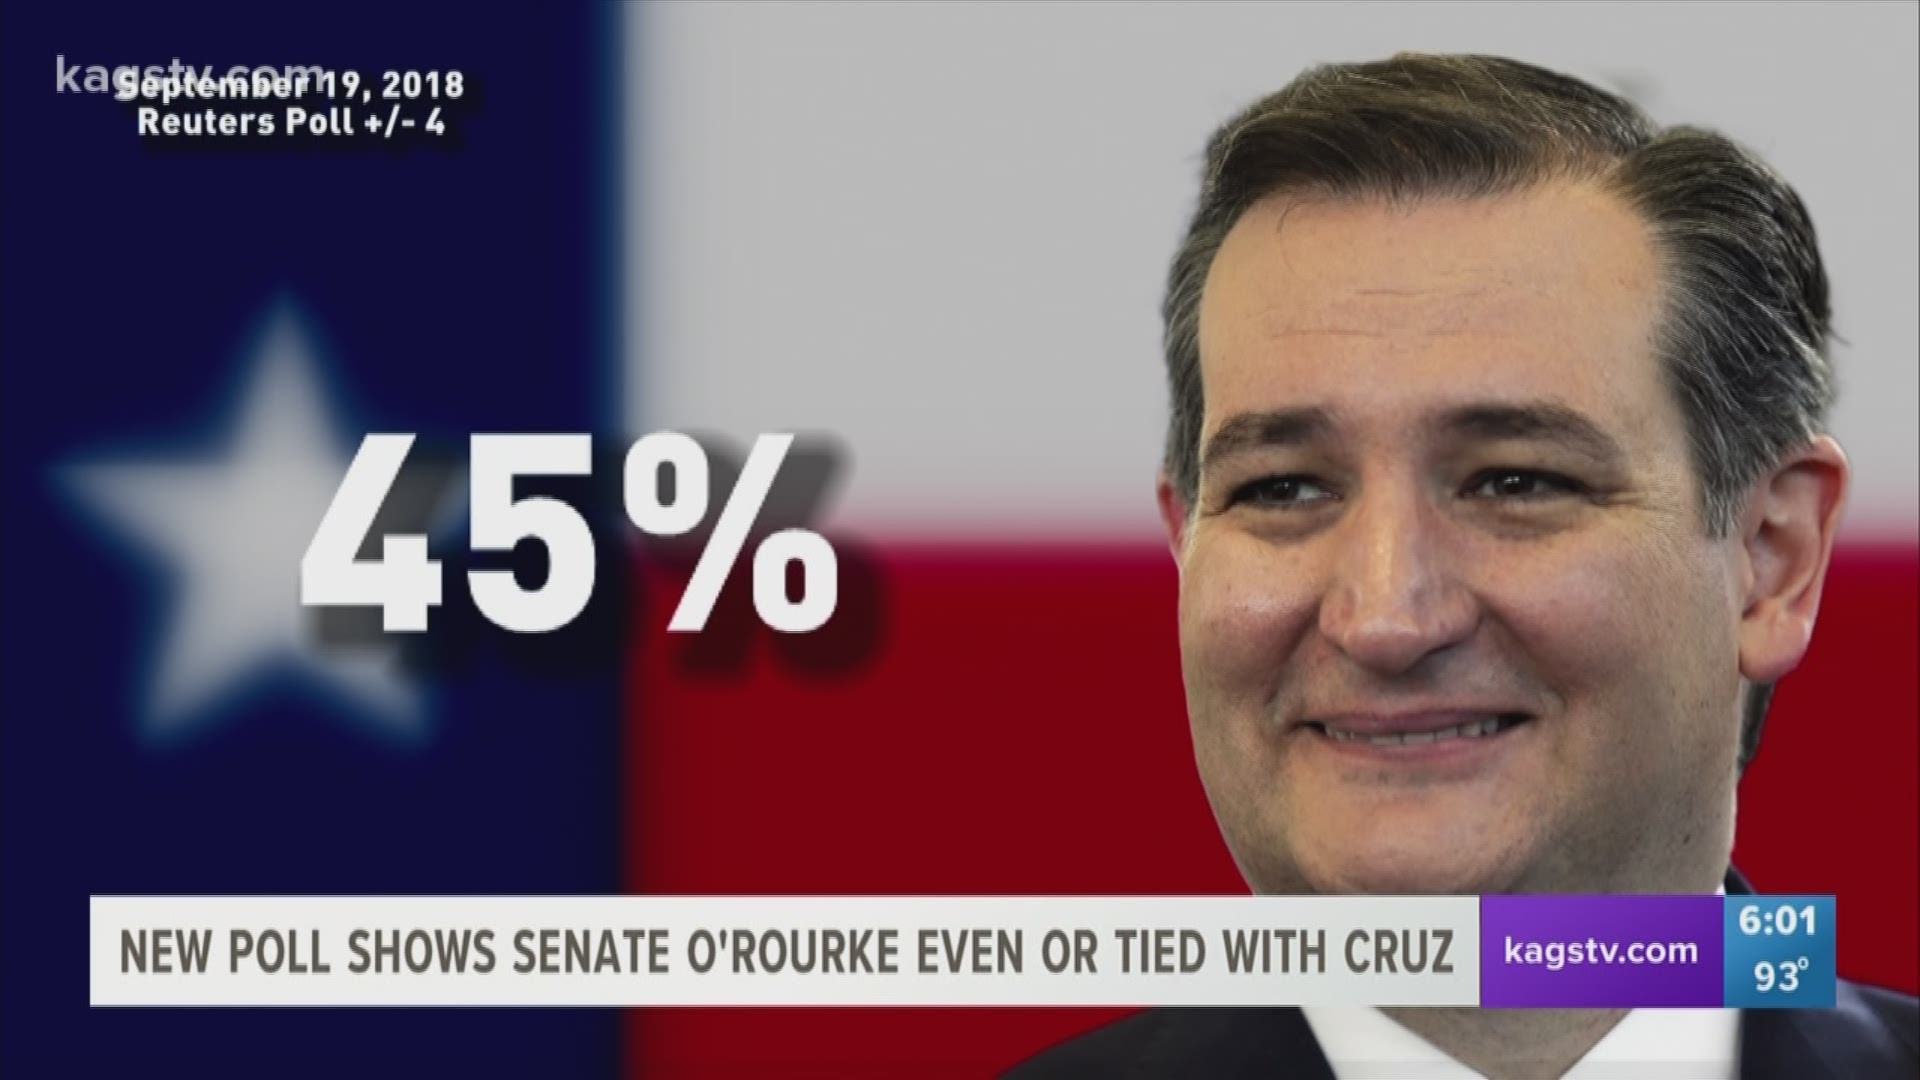 A Reuters Poll, released this morning, puts Beto O'Rourke up 2 points over current Republican Senator Ted Cruz.